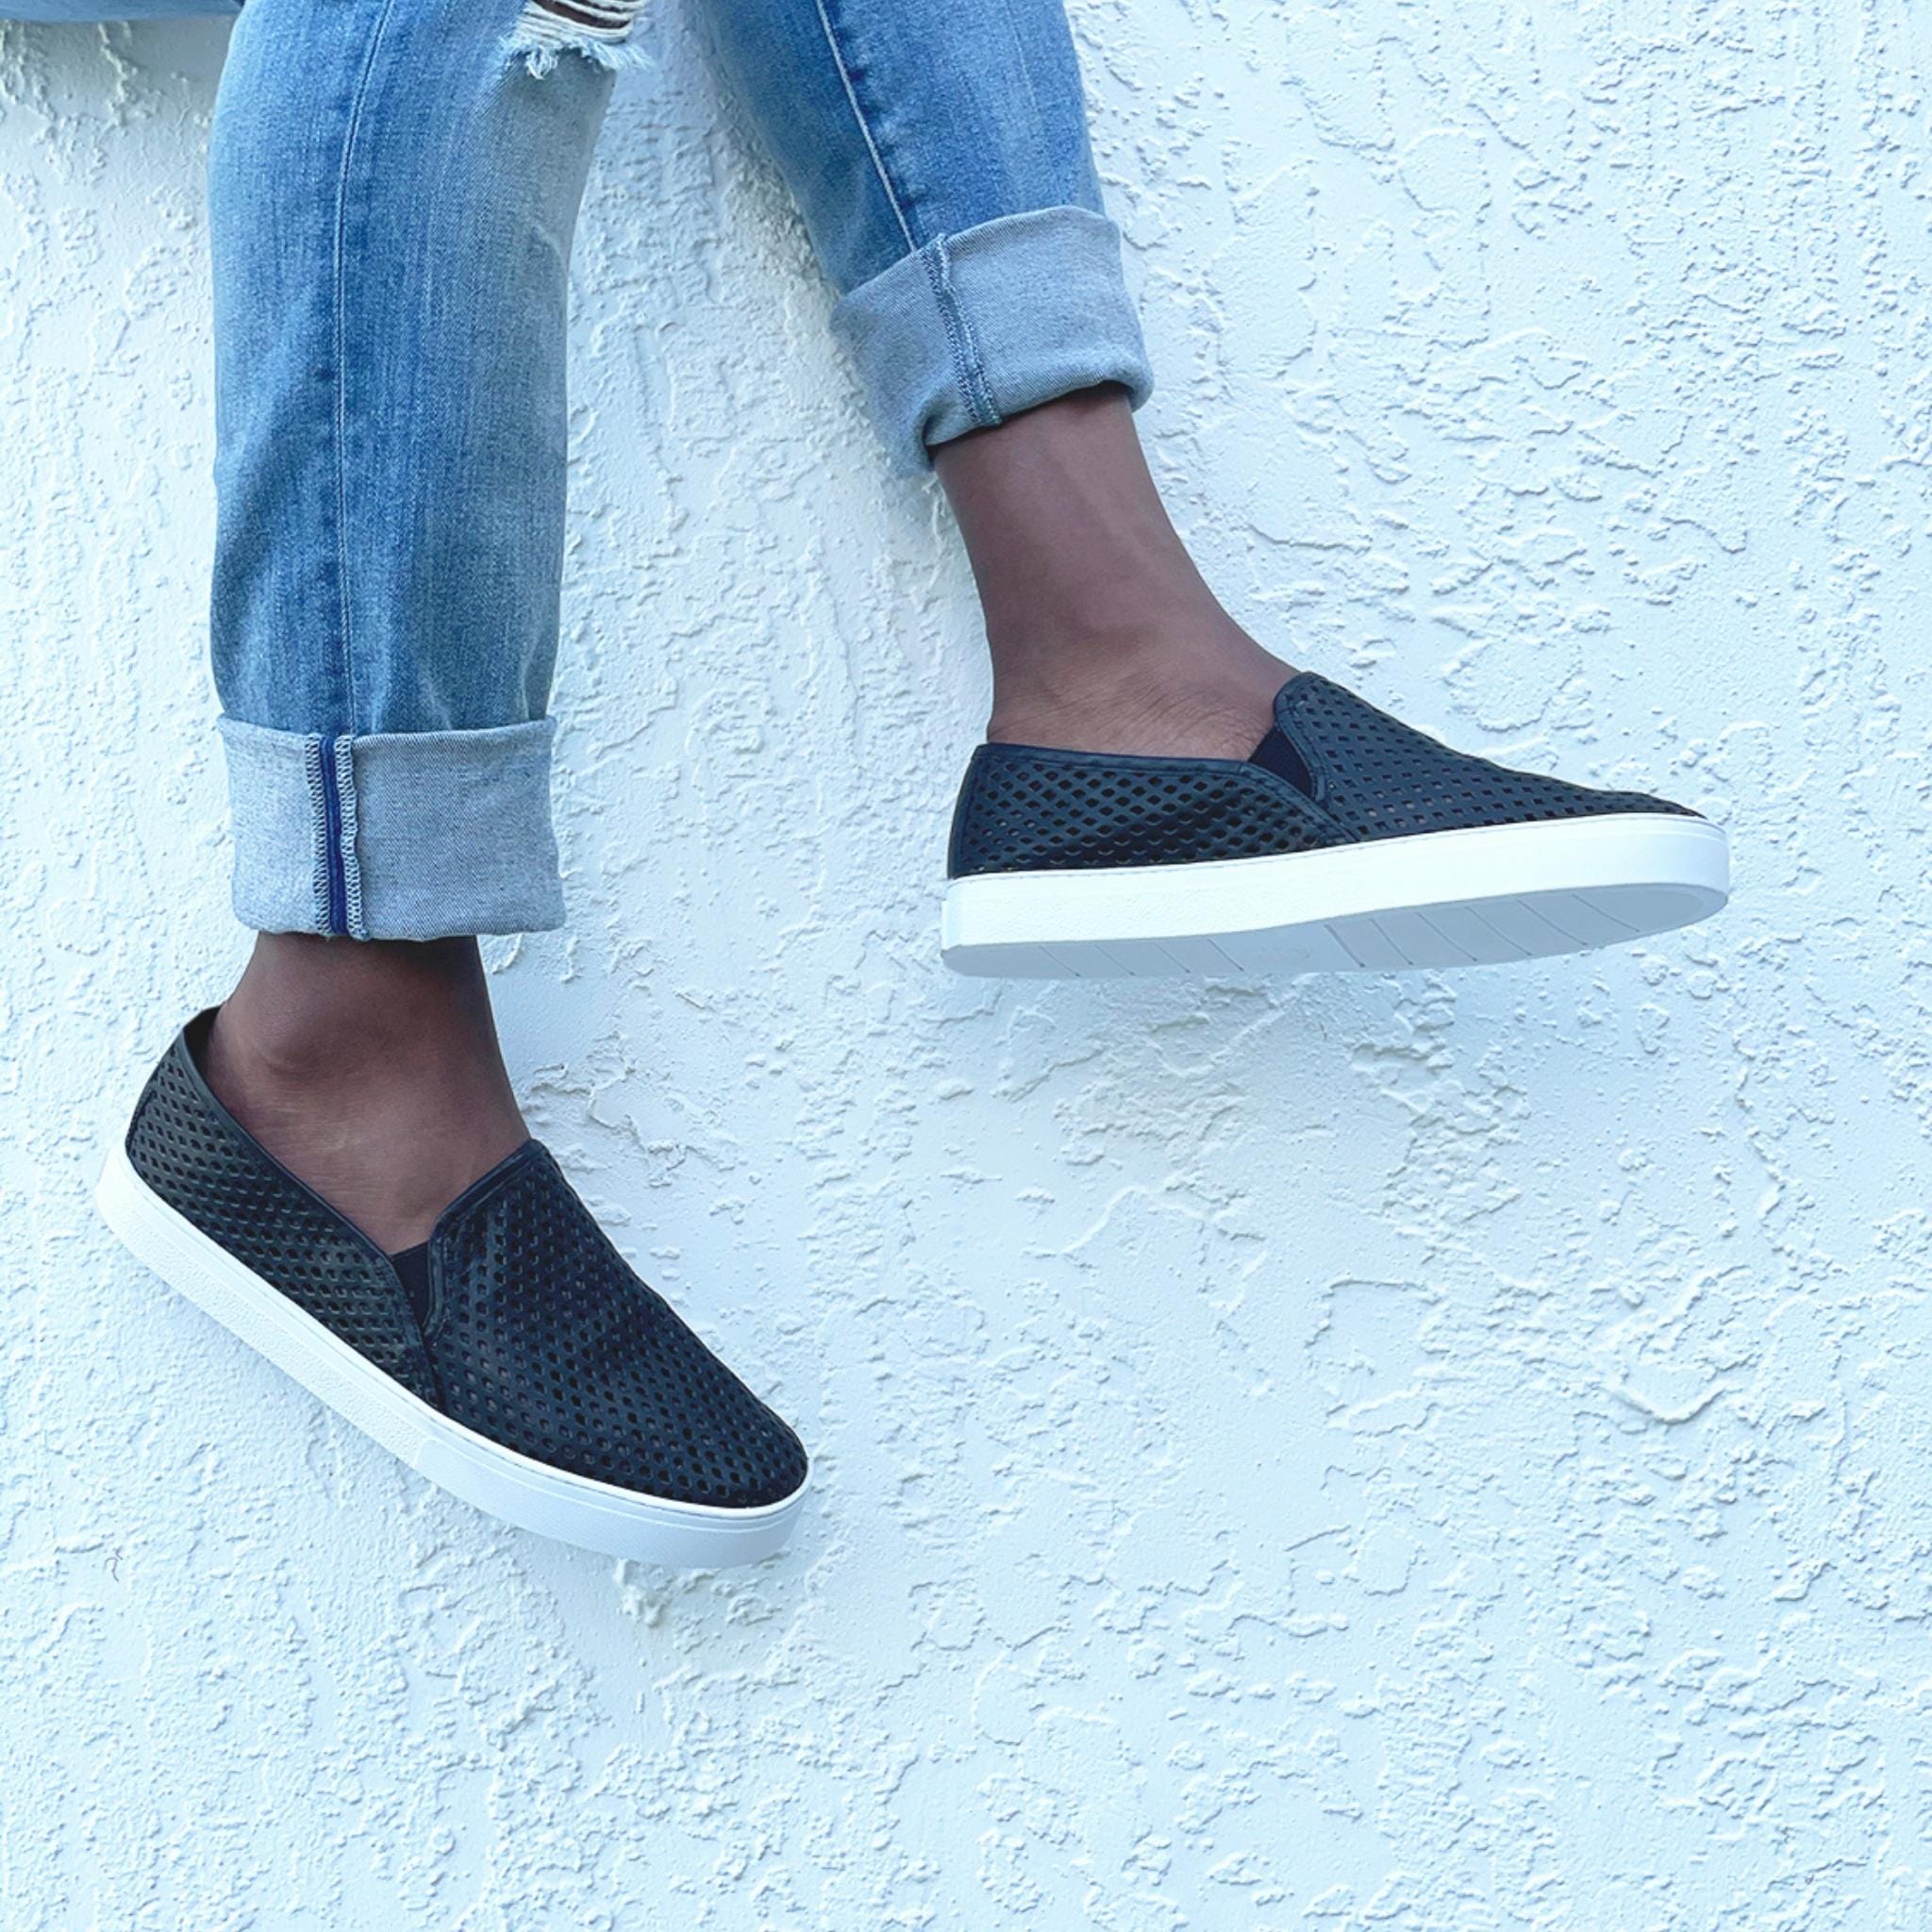 Jibs Classics Jet Black leather slip-on sneaker shoes sustainable Editorial